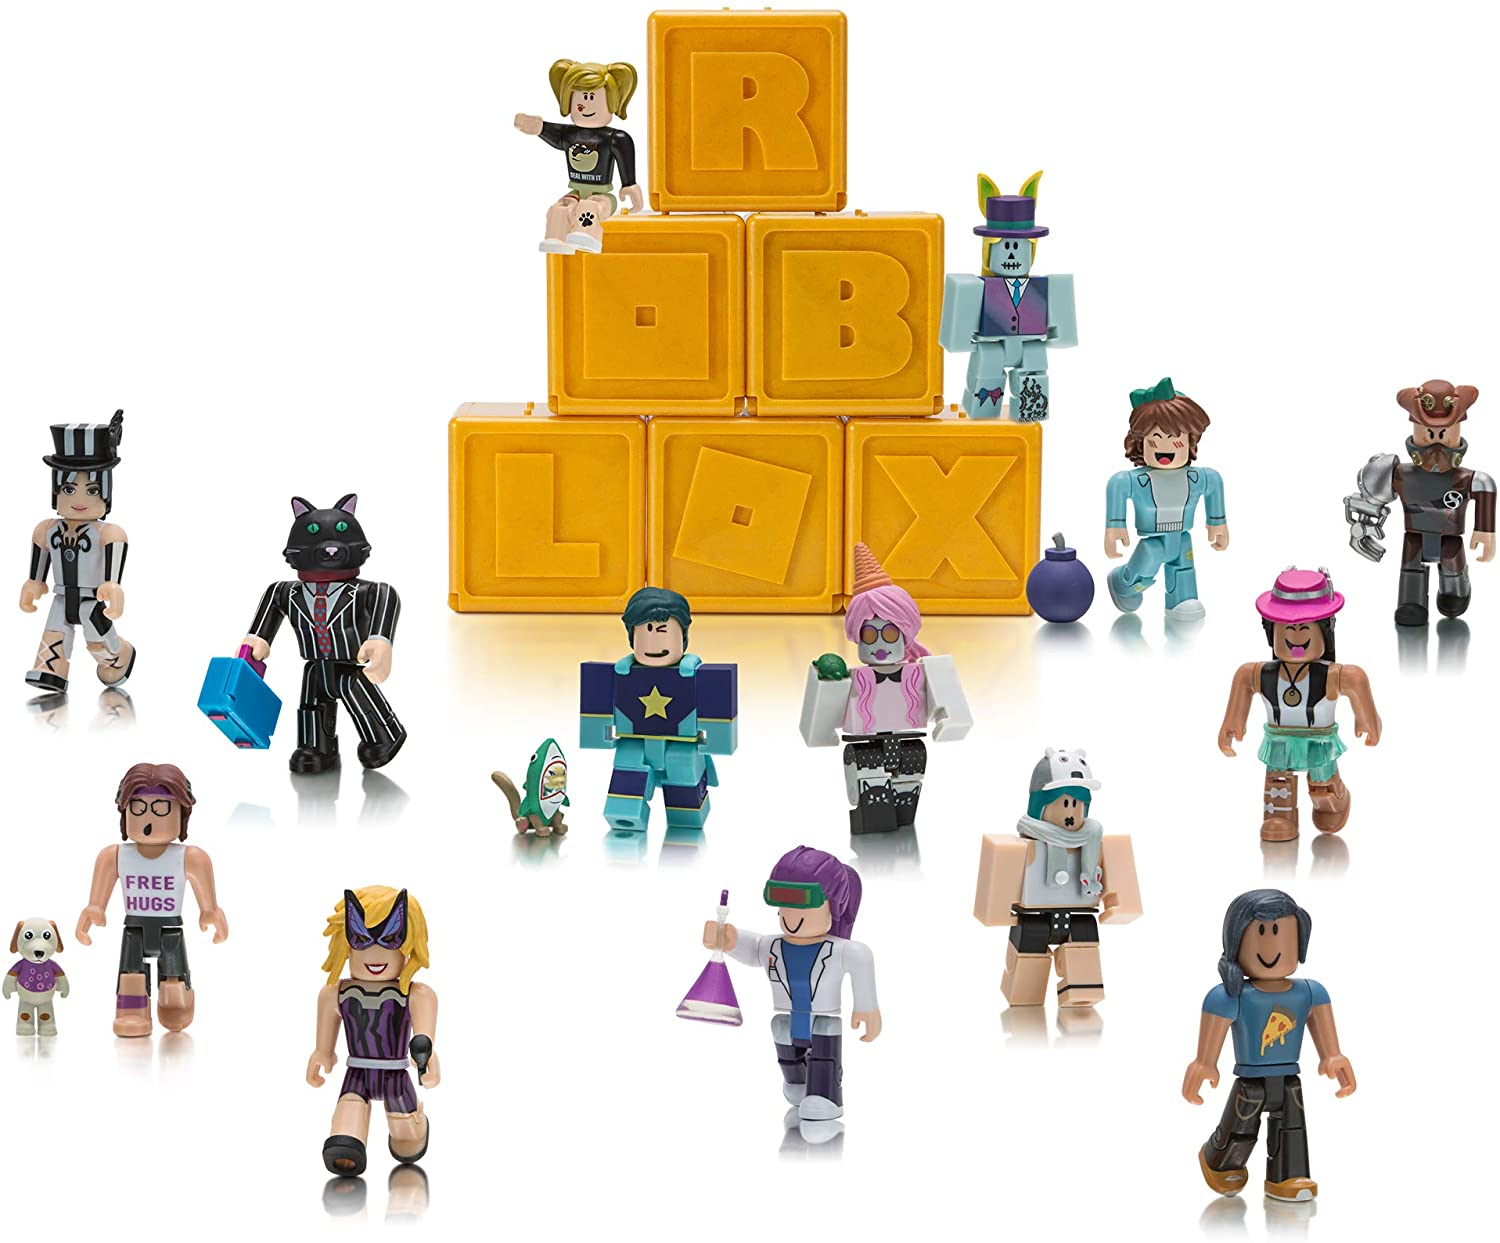 Roblox Celebrity Series 1 Mystery Box Codes Sky Toy Box - details about roblox celebrity gold series 1 2 3 4 exclusive mystery box toy figuresnew codes